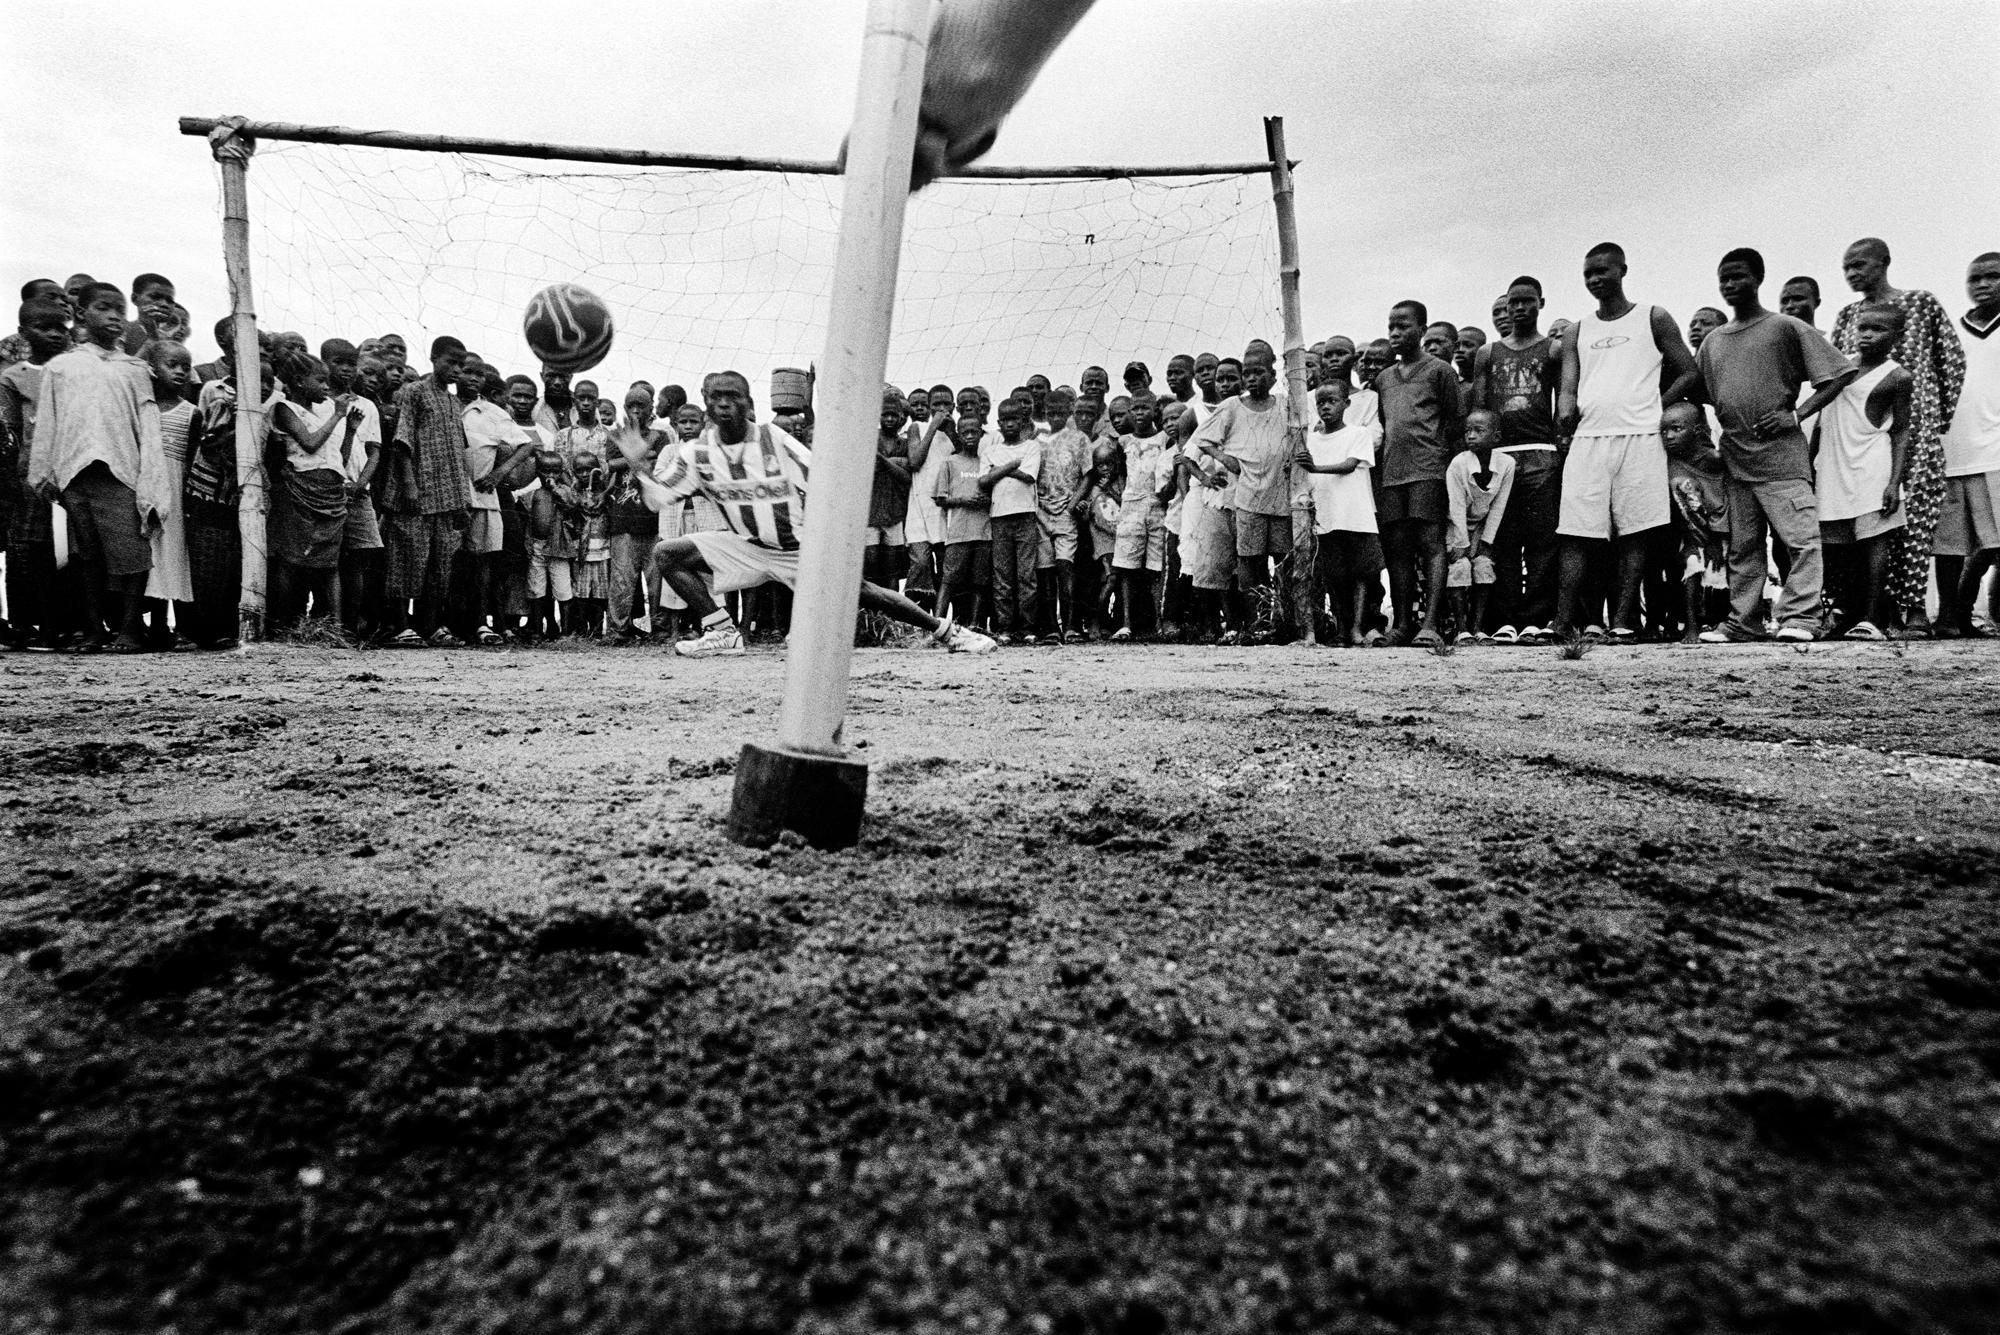 One Goal - SIERRA LEONE Freetown
A football player from...